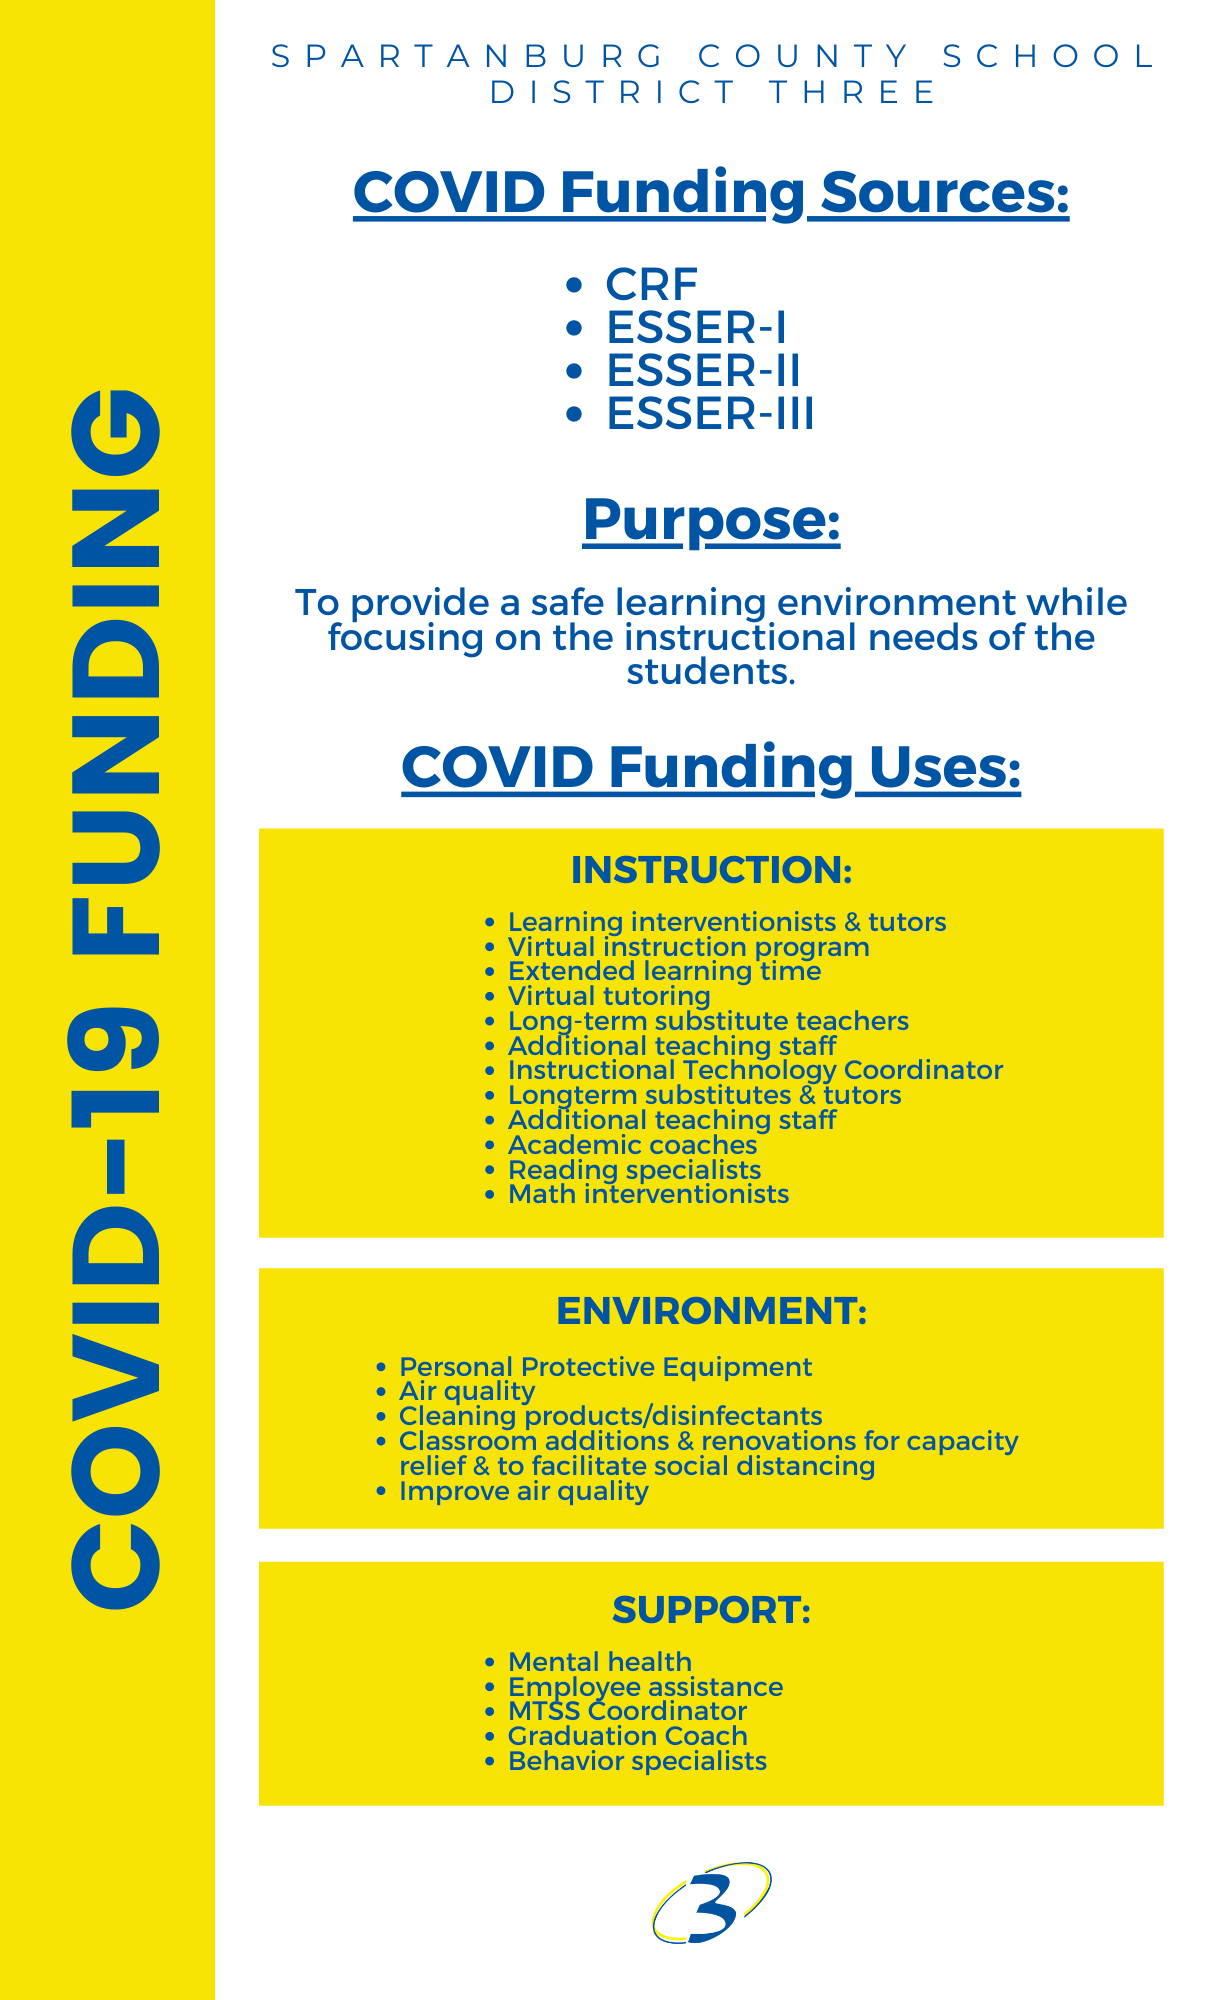 COVID-19 FUNDING  SPARTANBURG COUNTY SCHOOL DISTRICT THREE  COVID Funding Sources:  CRF ESSER-| ESSER-II ESSER-III  Purpose:  To provide a safe learning environment while focusing on the instructional needs of the  students. COVID Funding Uses: INSTRUCTION:  ¢ Learning interventionists & tutors ¢ Virtual instruction program  e Extended learning time  ¢ Virtual tutorin  e Long-term substitute teachers  ¢ Additional teaching sta  ¢ Instructional Technology Coordinator e Longterm substitutes & tutors  ¢ Additional teaching staff  ¢ Academic coaches  ¢ Reading specialists  e¢ Math interventionists  ENVIRONMENT:  e Personal Protective Equipment  e Air quality  ¢ Cleaning products/disinfectants  e Classroom additions & renovations for capacity relief & to facilitate social distancing  ¢ Improve air quality  SUPPORT:  e Mental health  e Employee assistance e MTSS Coordinator  e Graduation Coach  ¢ Behavior specialists  (3